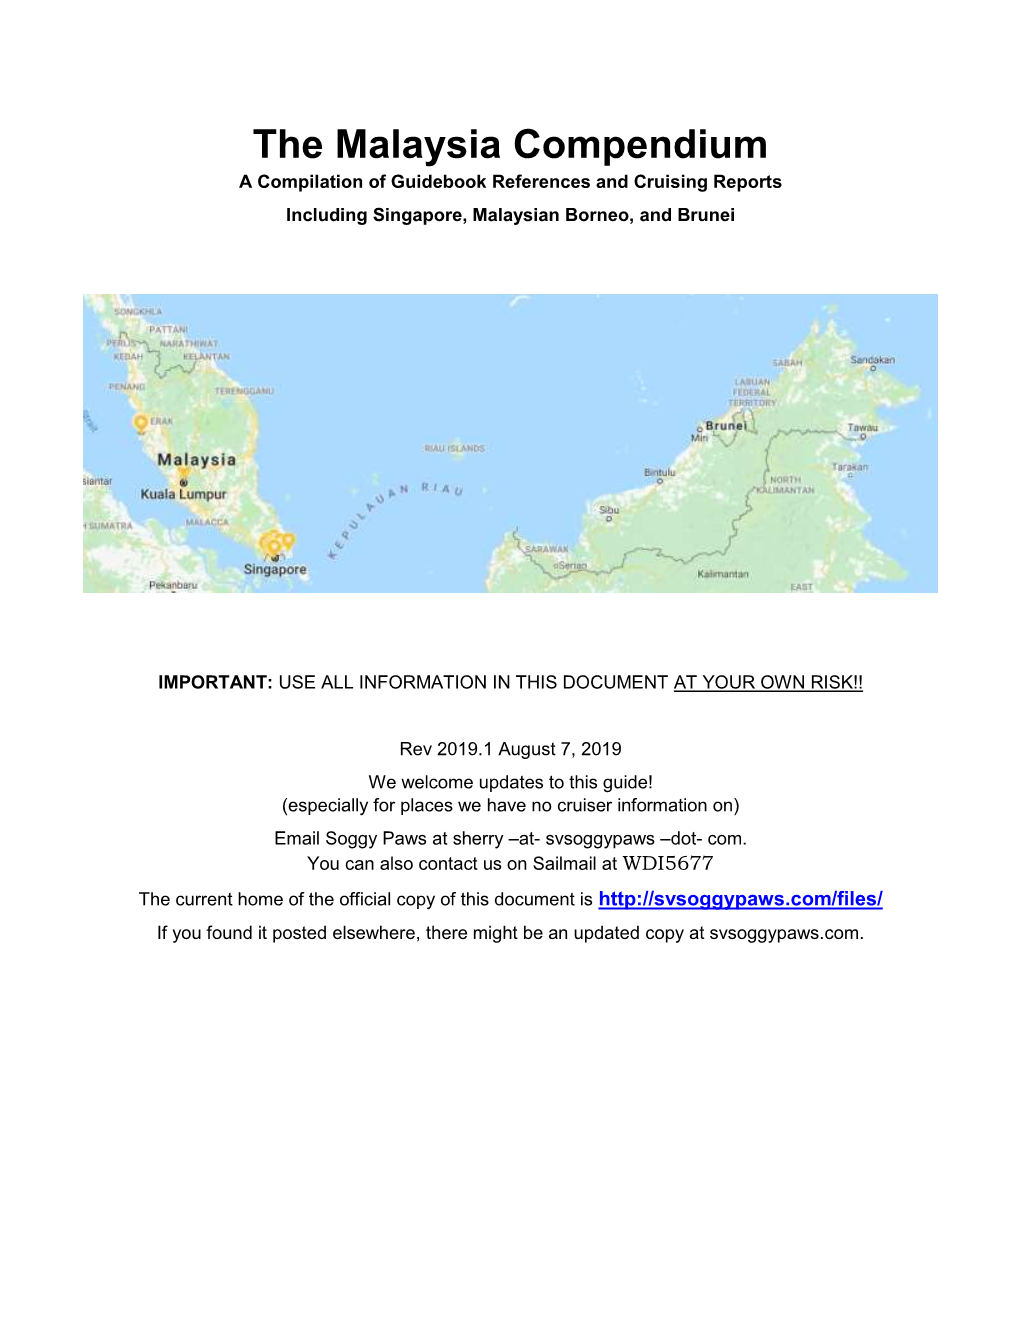 The Malaysia Compendium a Compilation of Guidebook References and Cruising Reports Including Singapore, Malaysian Borneo, and Brunei